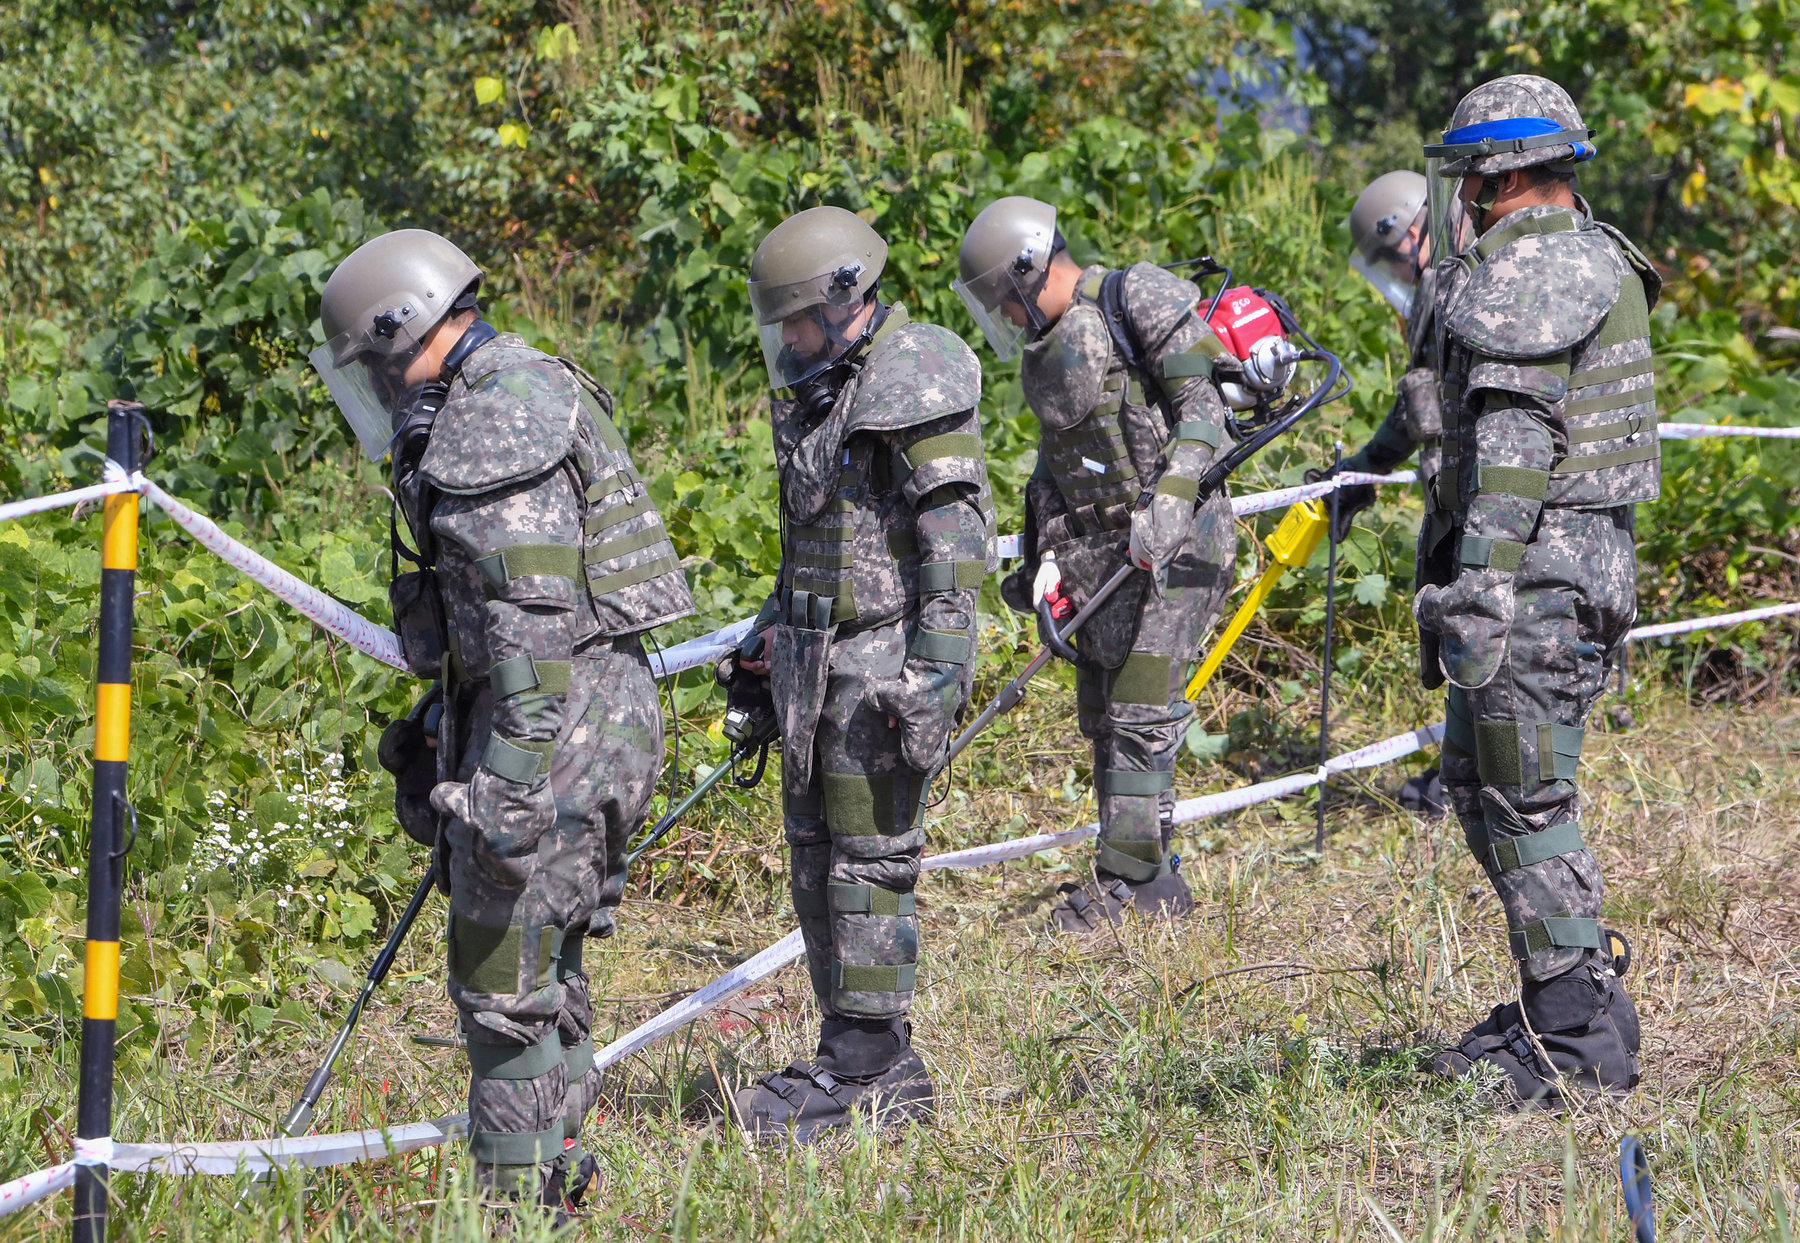 Most Dangerous Jobs in the World- Land-Mine-Removers